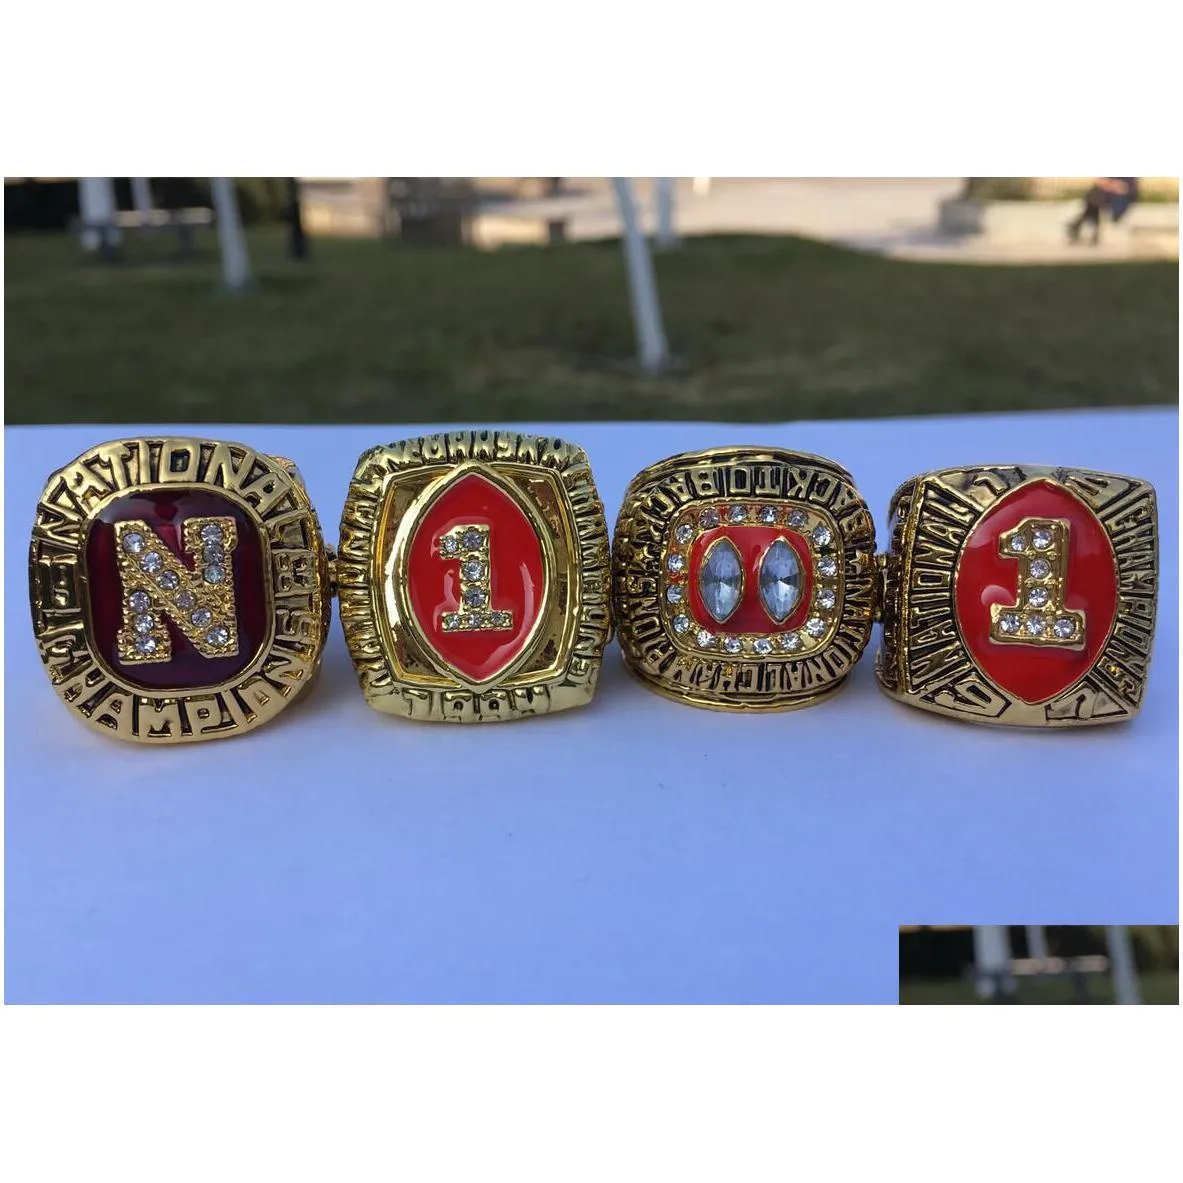 Cluster Rings 4Pcs 1983 1994 1995 1997 Nebraska Cornhuskers National Championship Ring With Wooden Display Box Men Fan Gift Wholesale Dhibc